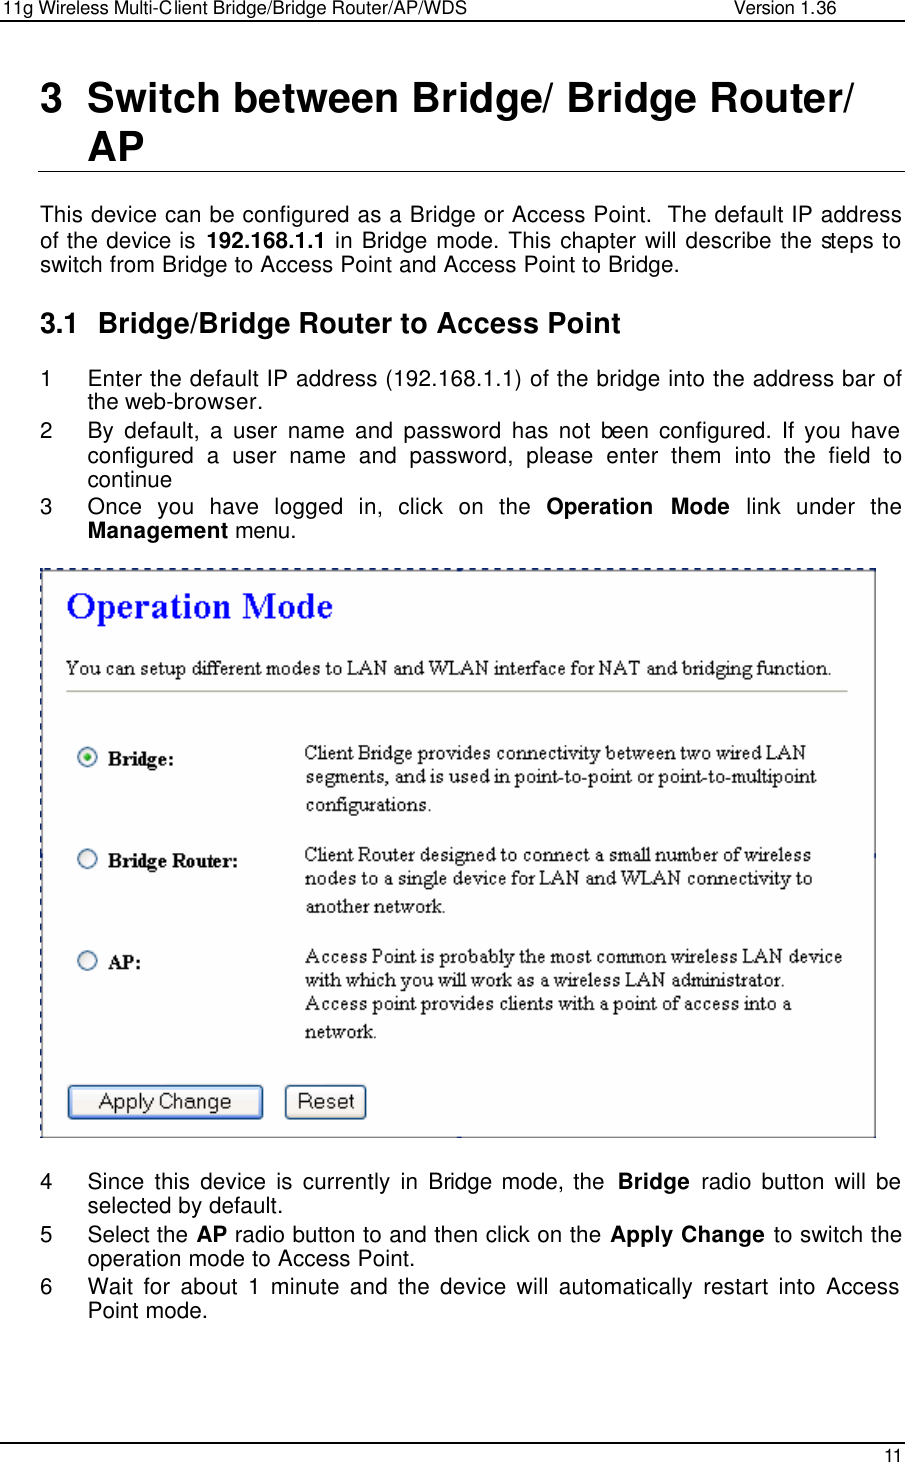 11g Wireless Multi-Client Bridge/Bridge Router/AP/WDS                                                   Version 1.36    11  3 Switch between Bridge/ Bridge Router/ AP  This device can be configured as a Bridge or Access Point.  The default IP address of the device is 192.168.1.1 in Bridge mode. This chapter will describe the steps to switch from Bridge to Access Point and Access Point to Bridge.    3.1 Bridge/Bridge Router to Access Point  1 Enter the default IP address (192.168.1.1) of the bridge into the address bar of the web-browser. 2 By default, a user name and password has not been configured. If you have configured a user name and password, please enter them into the field to continue 3 Once you have logged in, click on the Operation Mode link under the Management menu.                         4 Since this device is currently in Bridge mode, the  Bridge radio button will be selected by default.  5 Select the AP radio button to and then click on the Apply Change to switch the operation mode to Access Point.  6 Wait for about 1 minute and the device will automatically restart into Access Point mode.   